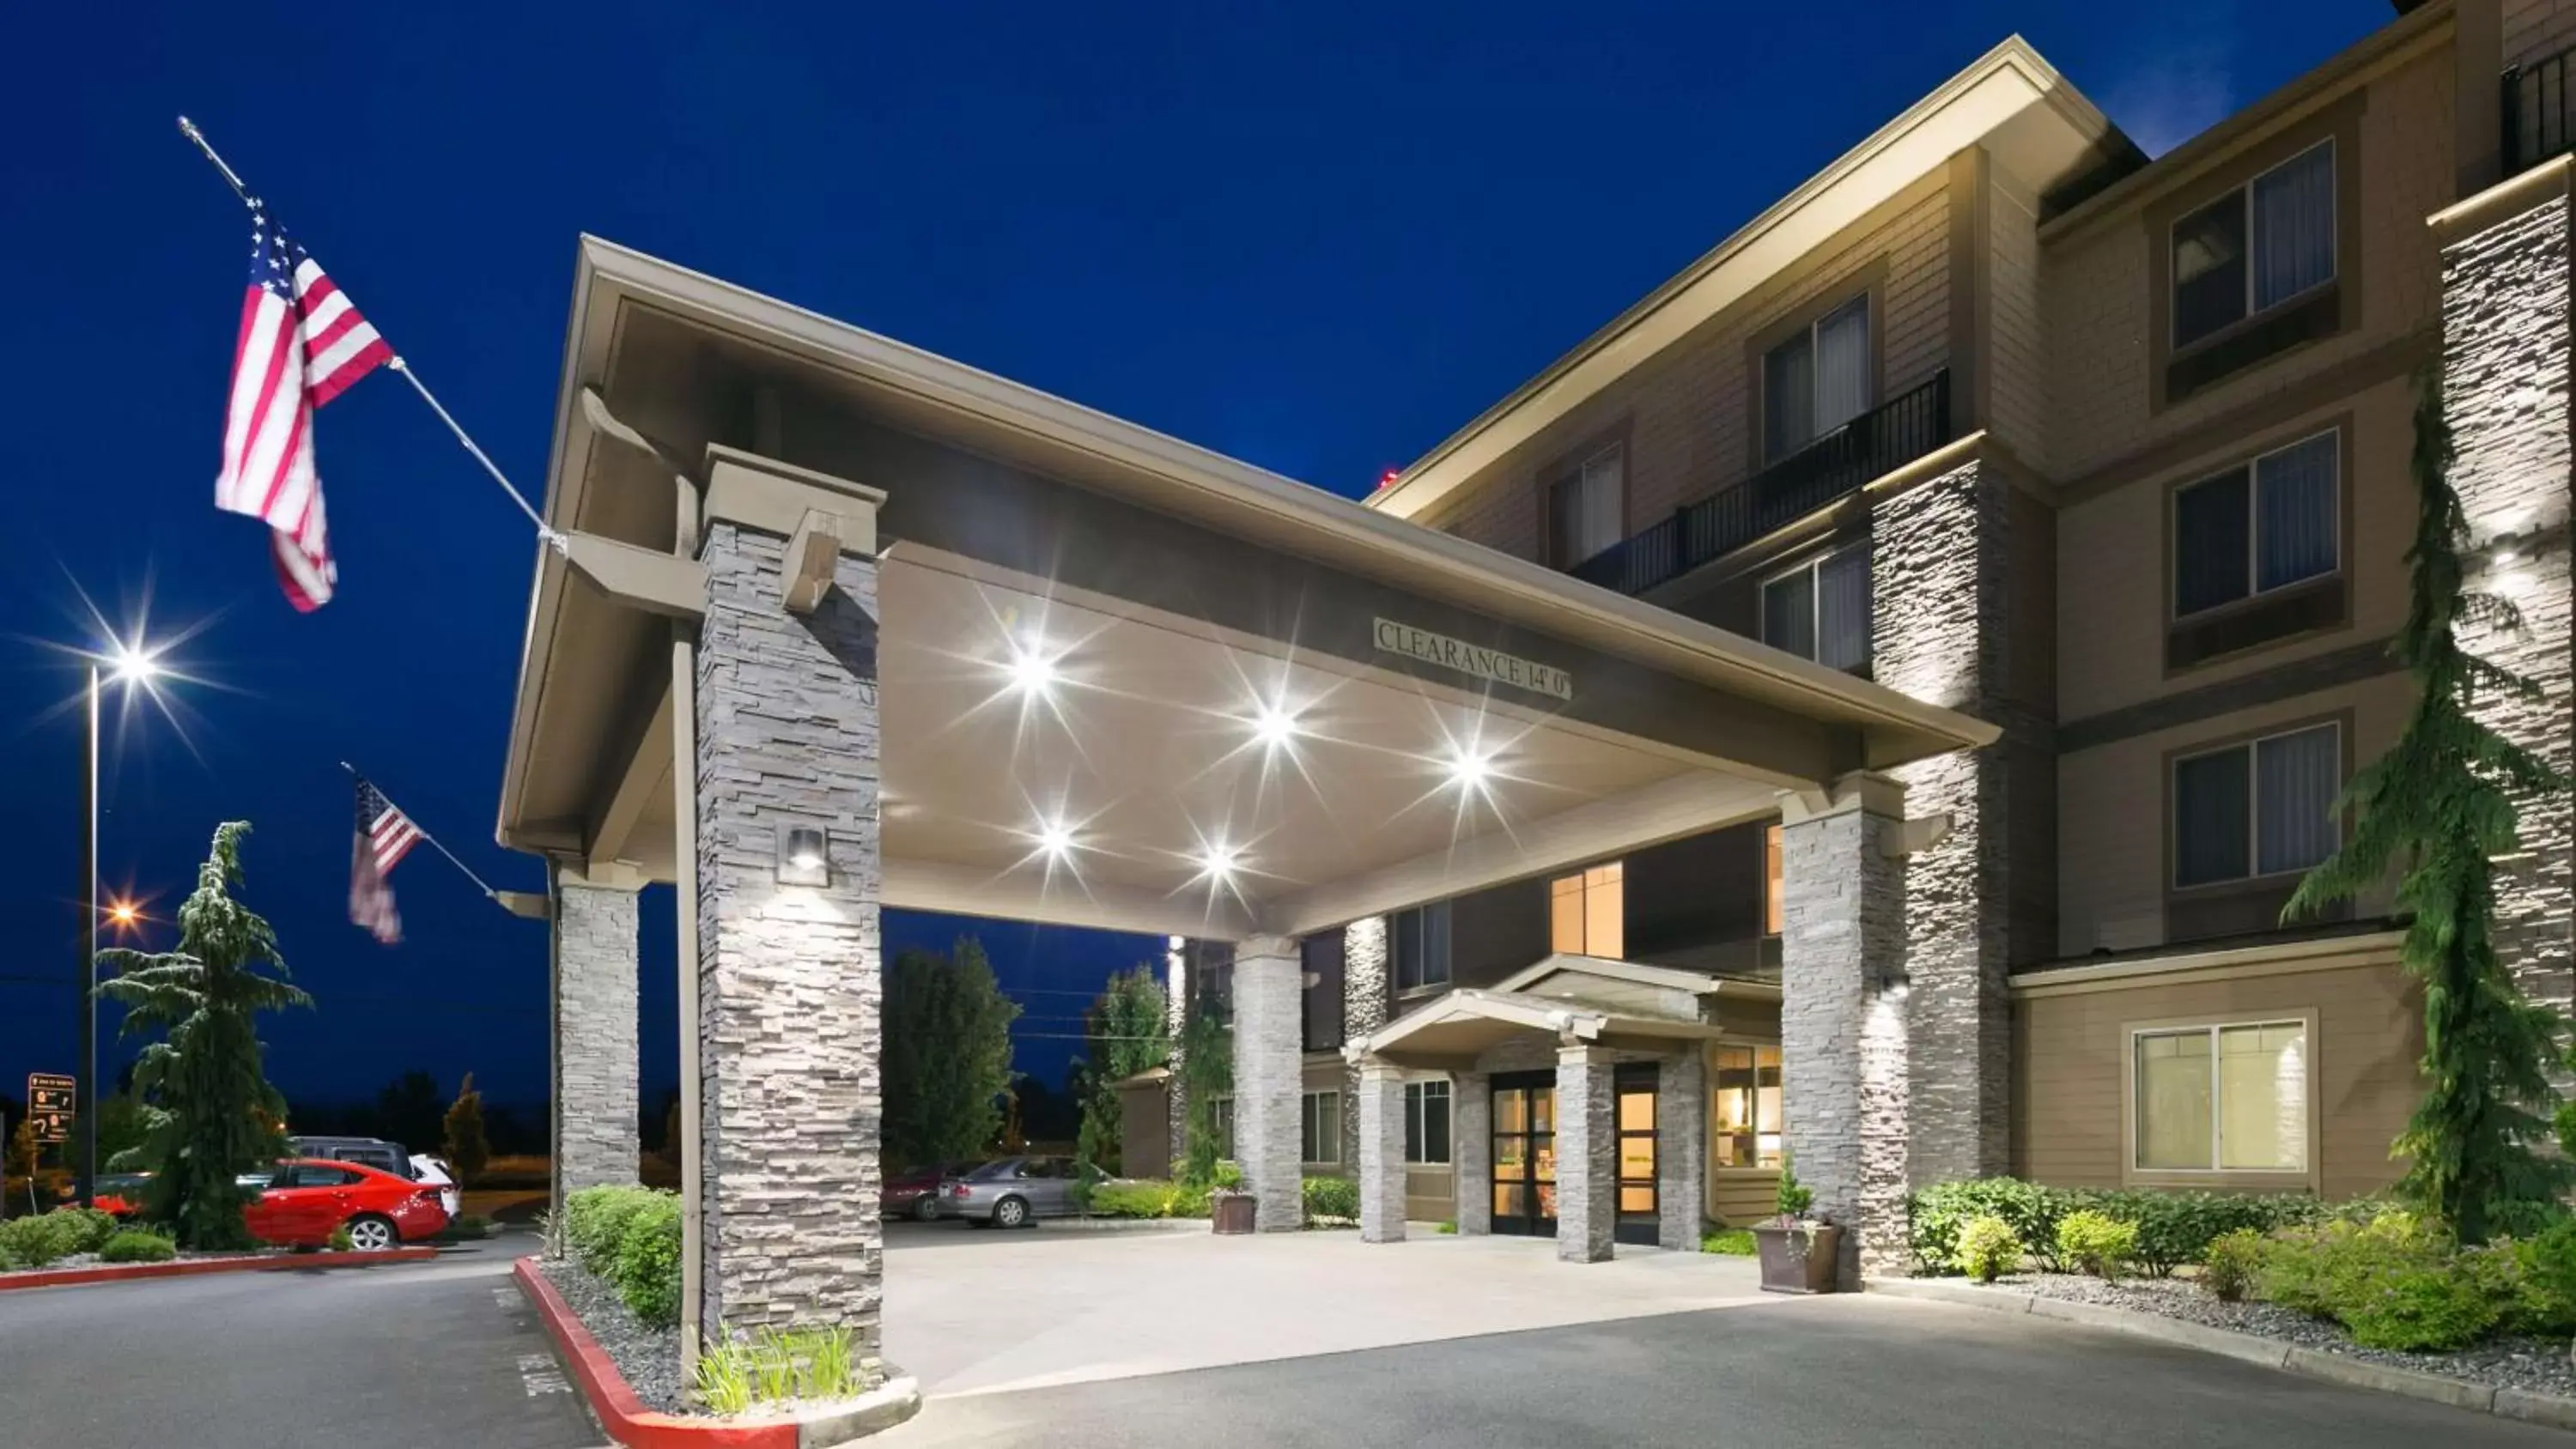 Property Building in Best Western Plus Port of Camas-Washougal Convention Center